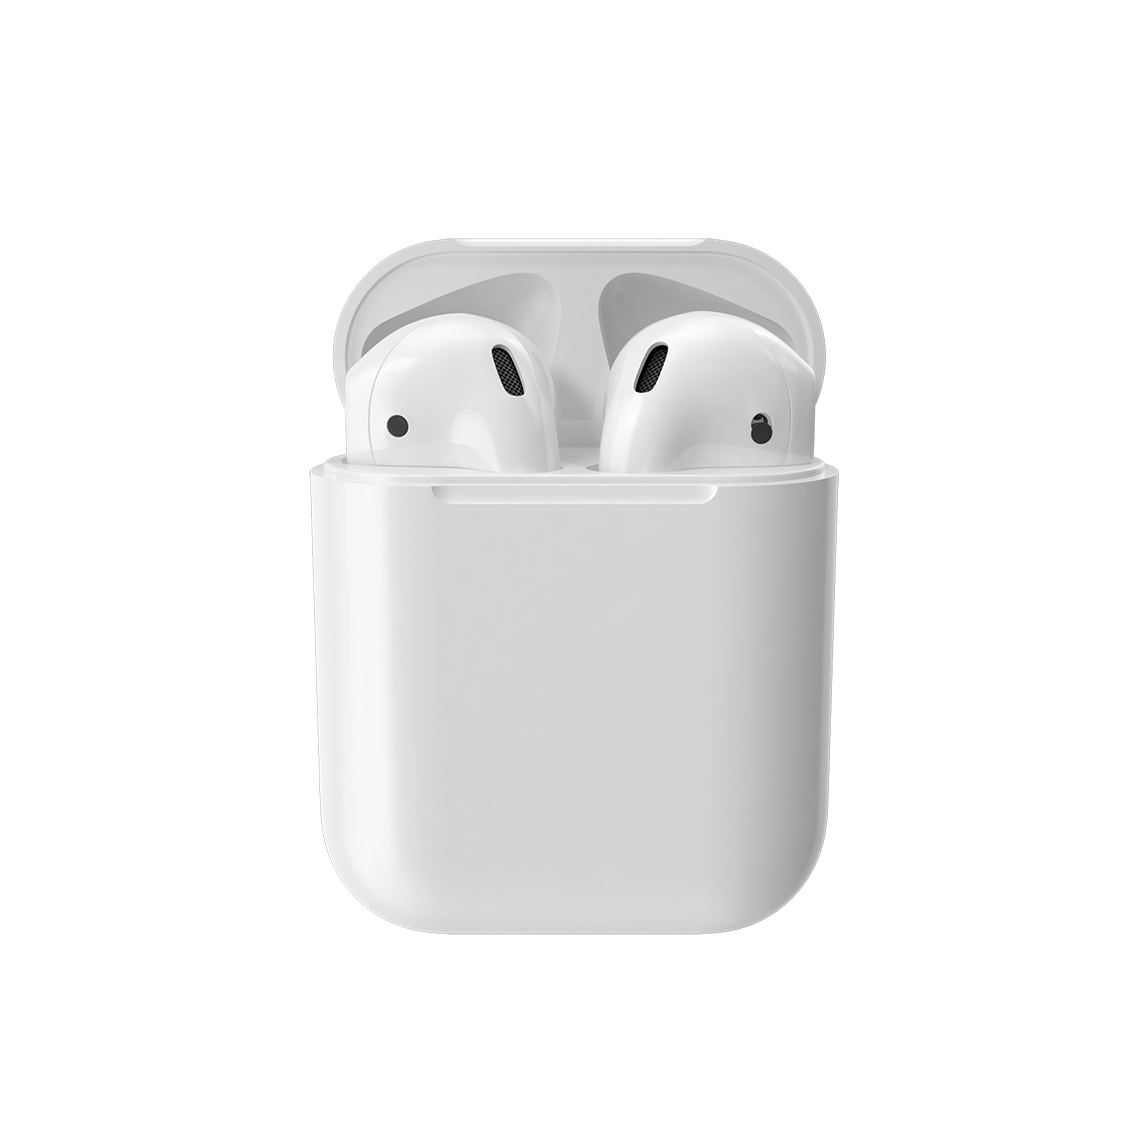 AirPods (Parent Product)